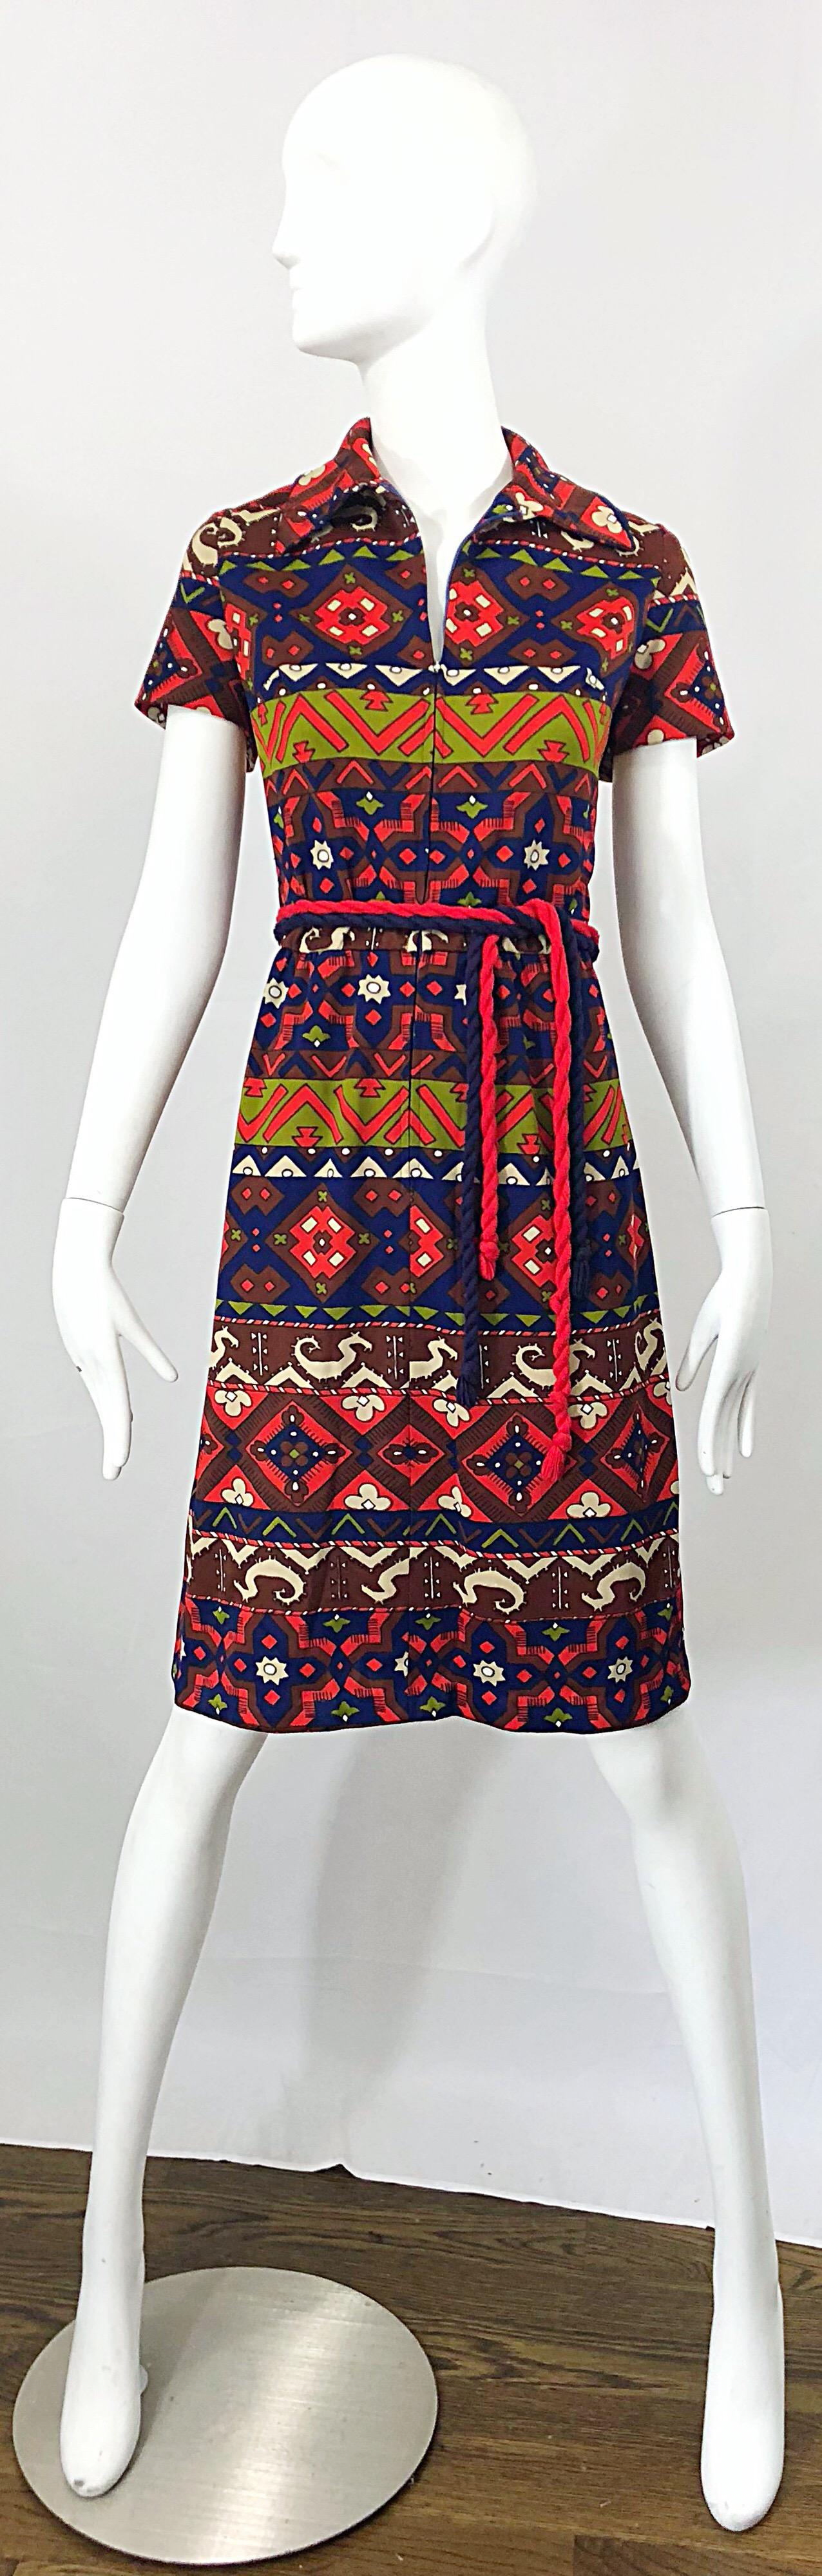 Amazing vintage Aztec inspired 1970s knit belted shirt dress! Features warm tones of red, chartreuse green, navy blue and maroon throughout. Zips up the front to control cleavage. Two tassel belts in red and navy. Great with heels, sandals, wedges,